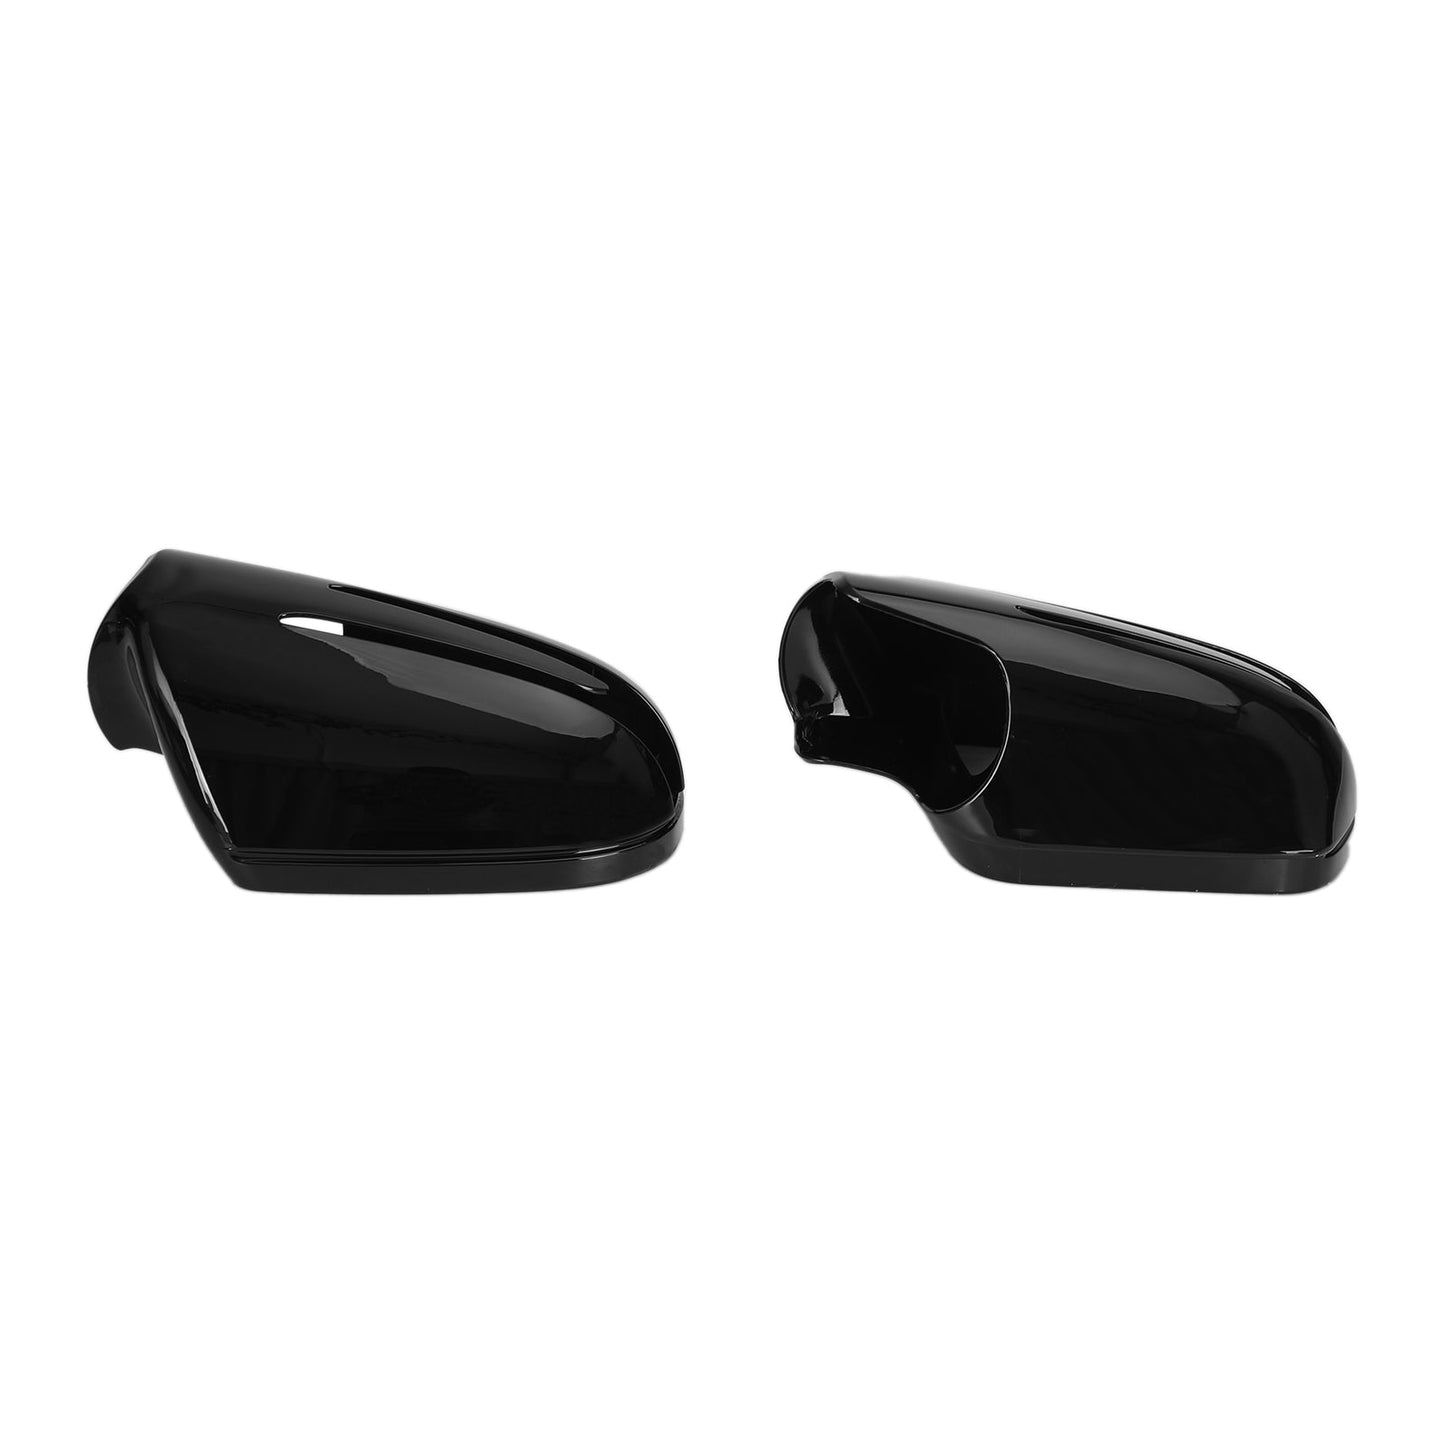 2009-2011 Mercedes BENZ CLS-Class W219 Facelift Pair Rearview Mirror Cover Gloss 1718100364 1718100564 2198100115 2198102576